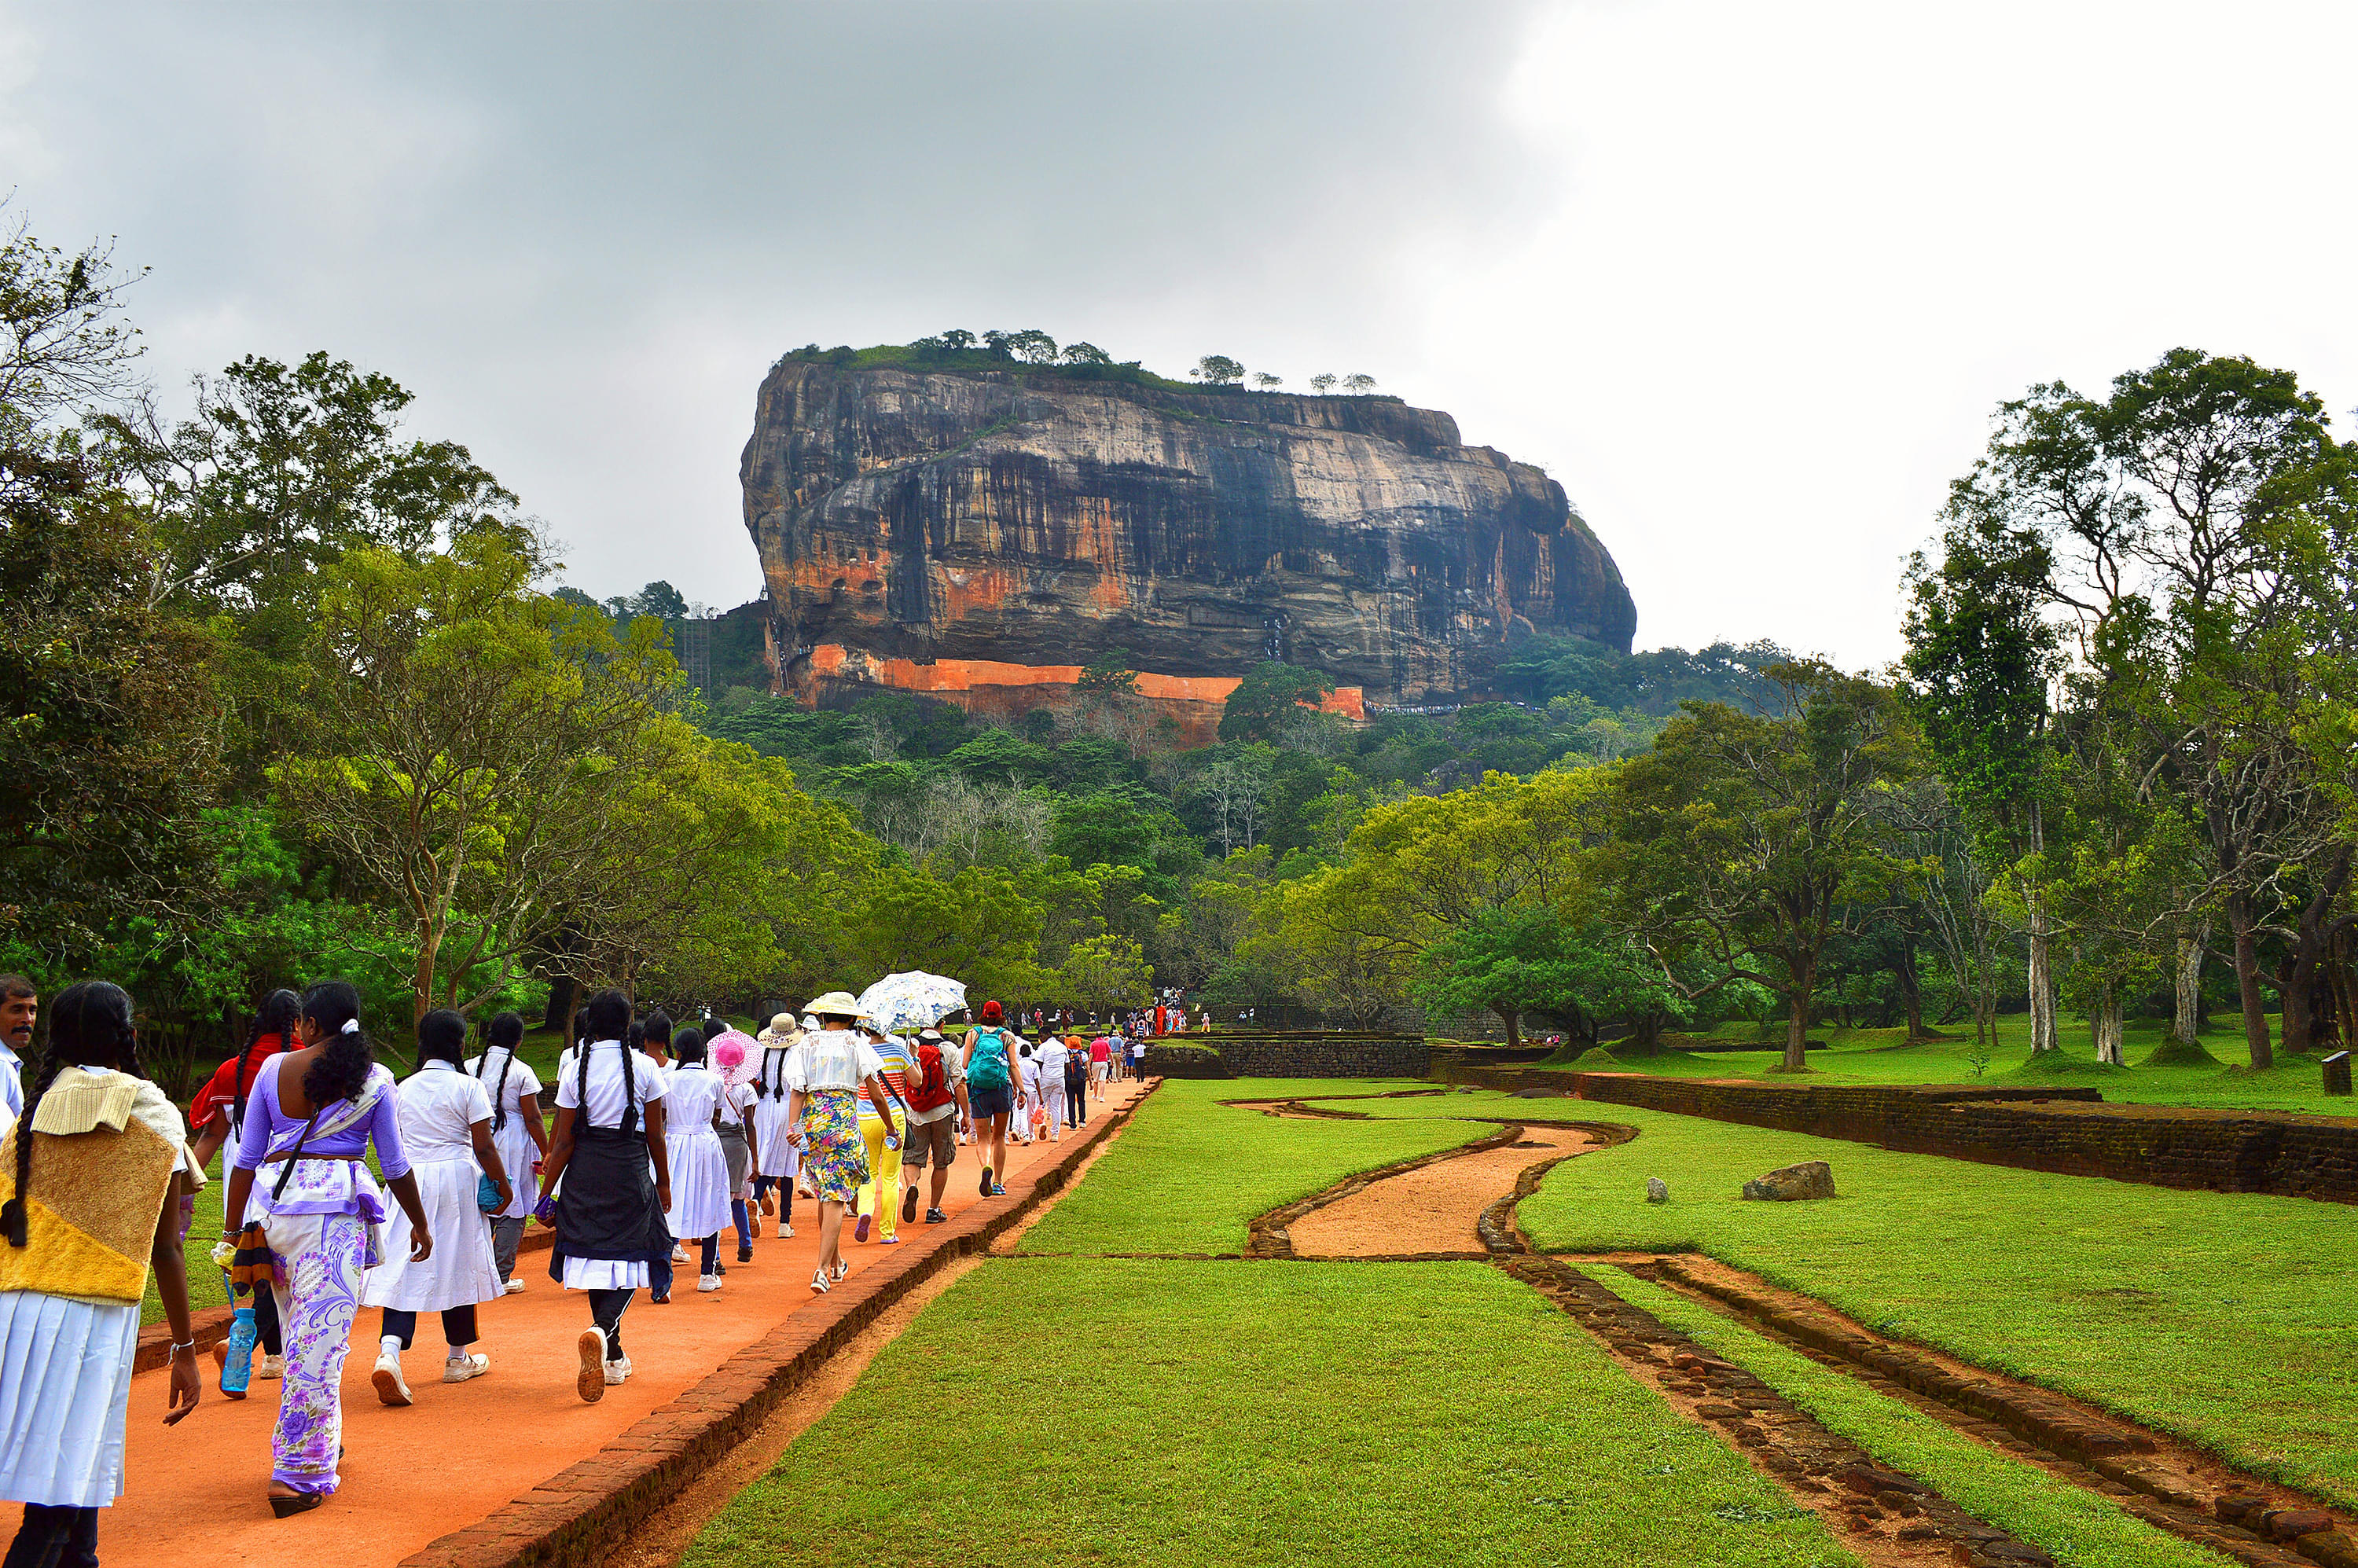 Sigiriya Lions Rock Fortress Day Tour And Village Experience from Colombo